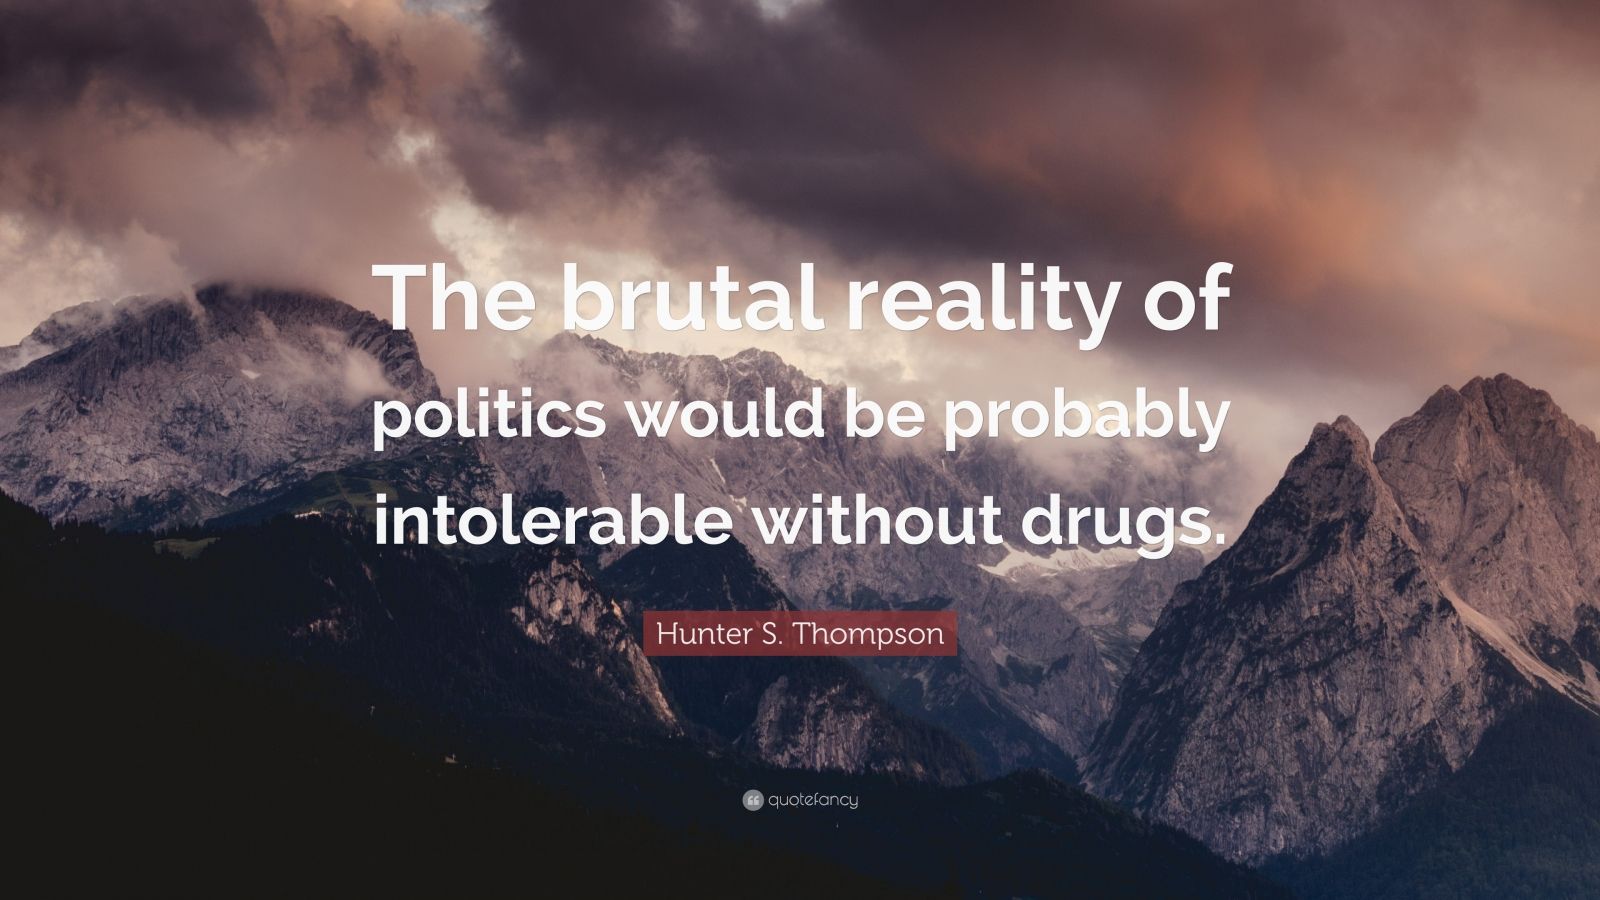 Hunter S. Thompson Quote: “The brutal reality of politics would be